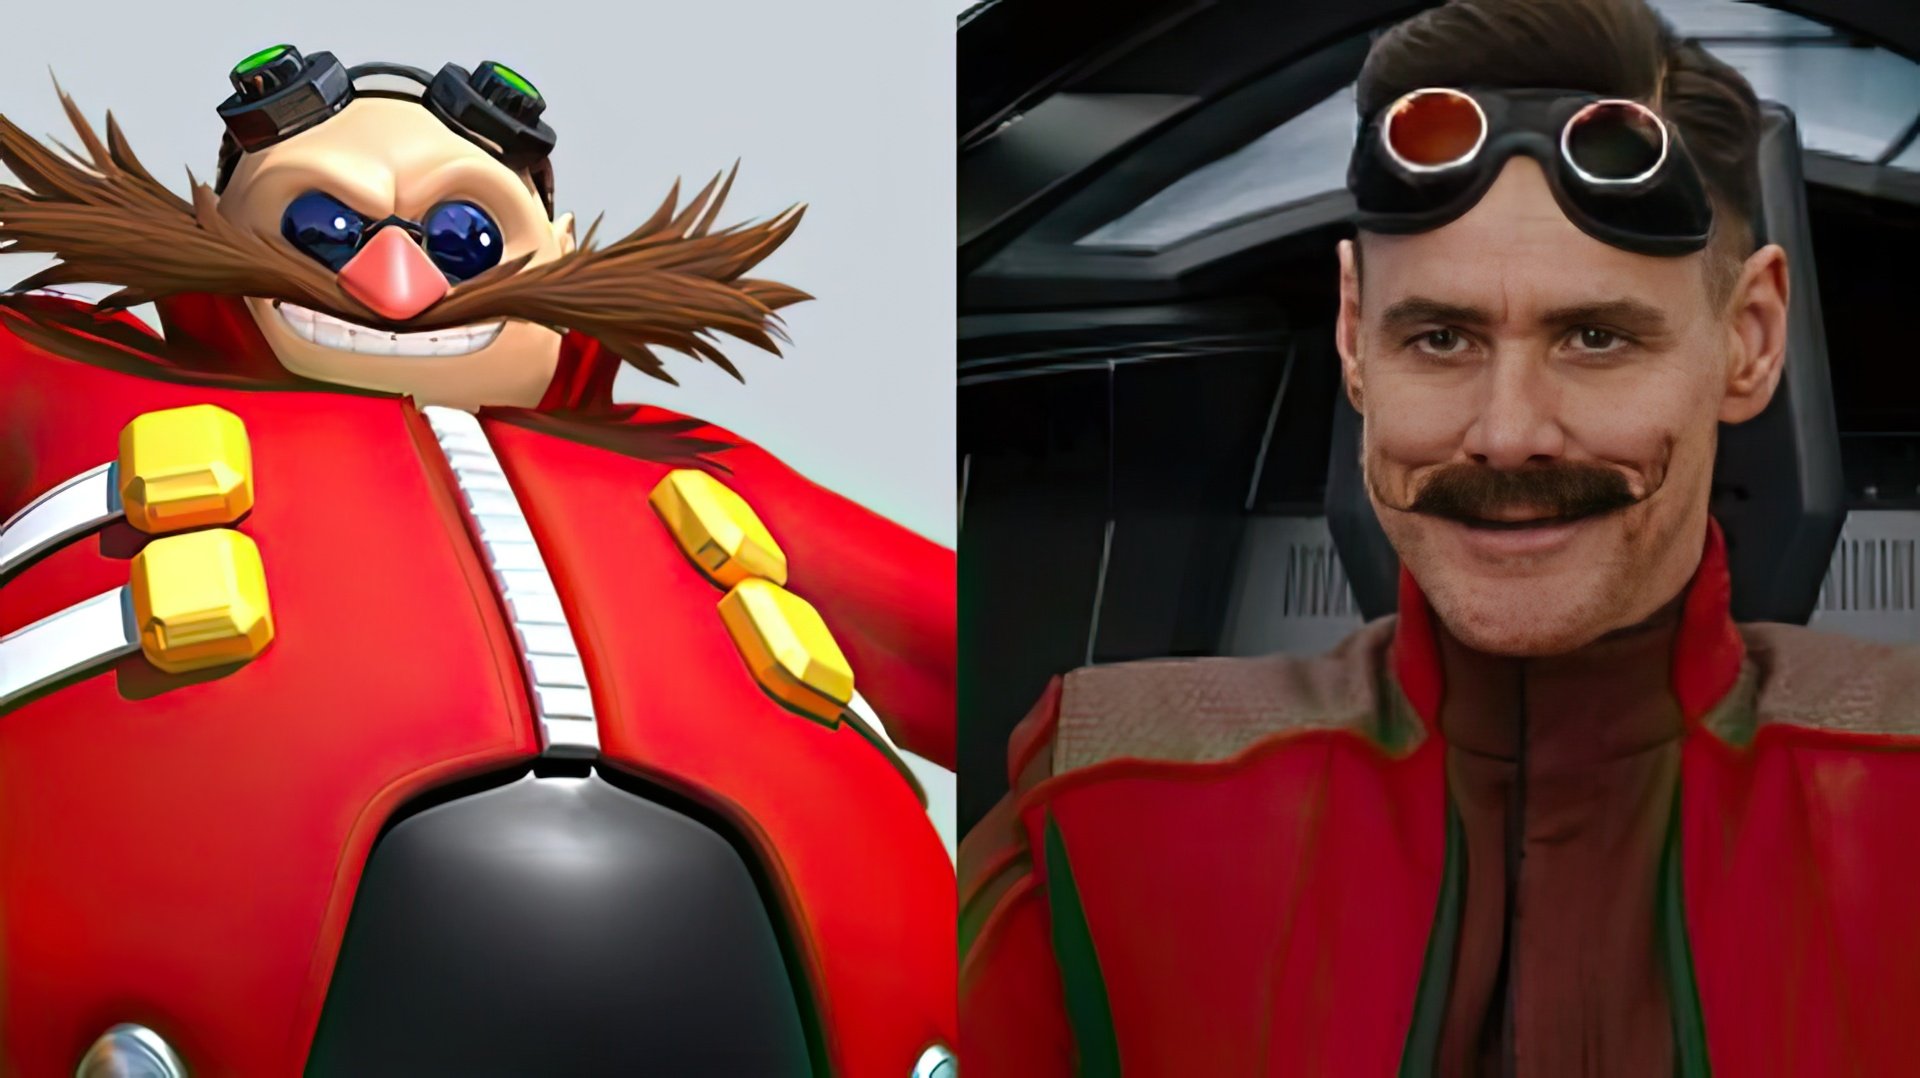 Jim Carrey in the movie Sonic